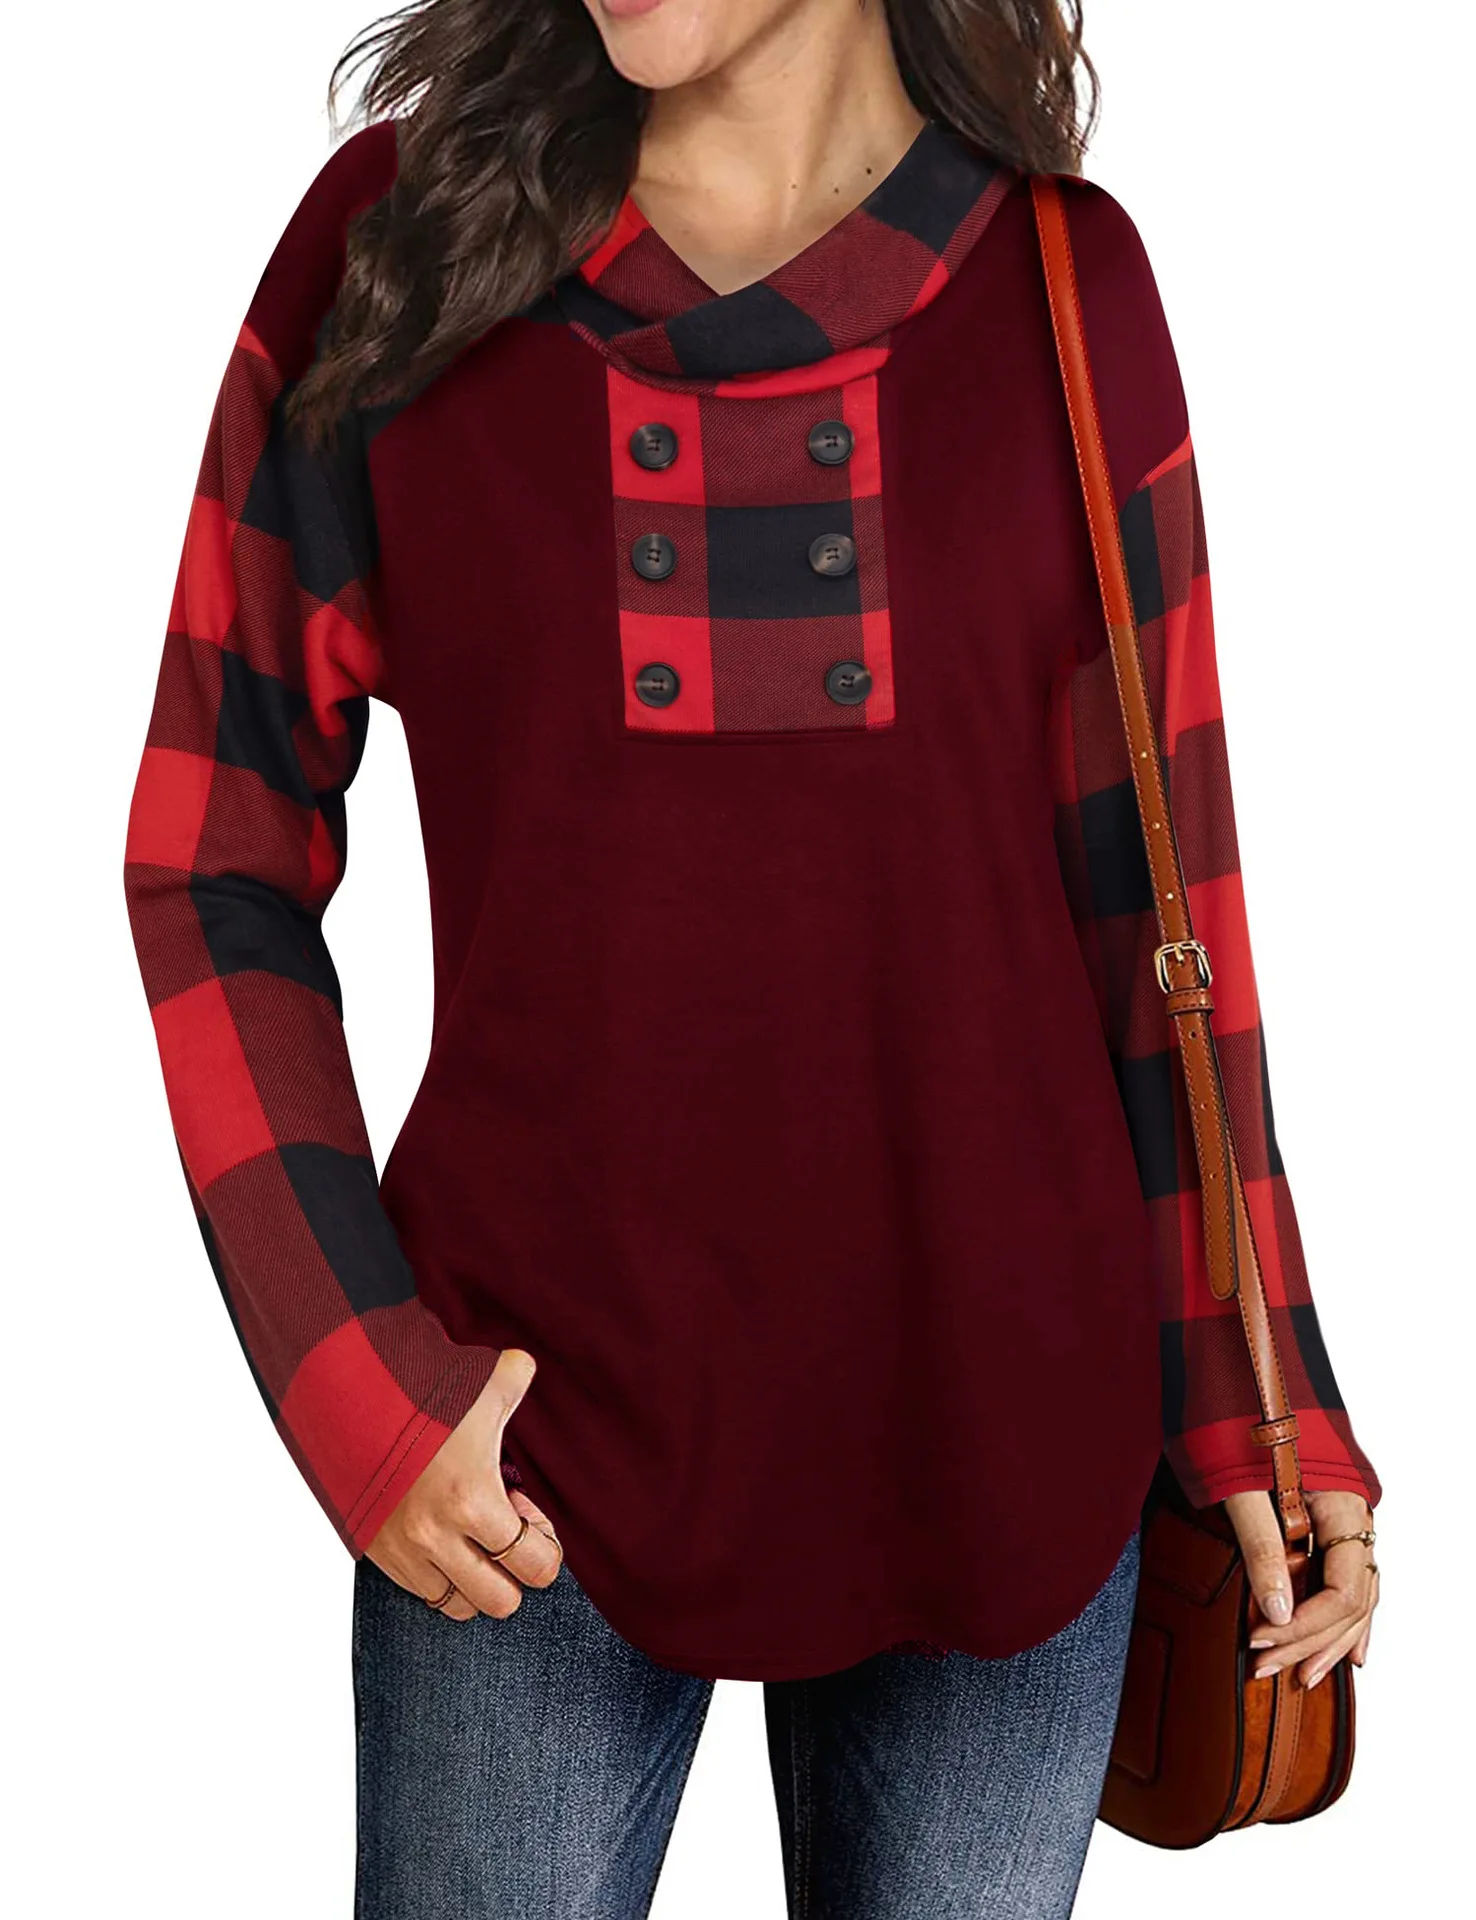 2022 Autumn and Winter Women's New Long-sleeved Printed Plaid Button Hooded Sweater T-shirt Women Winter Clothes Women